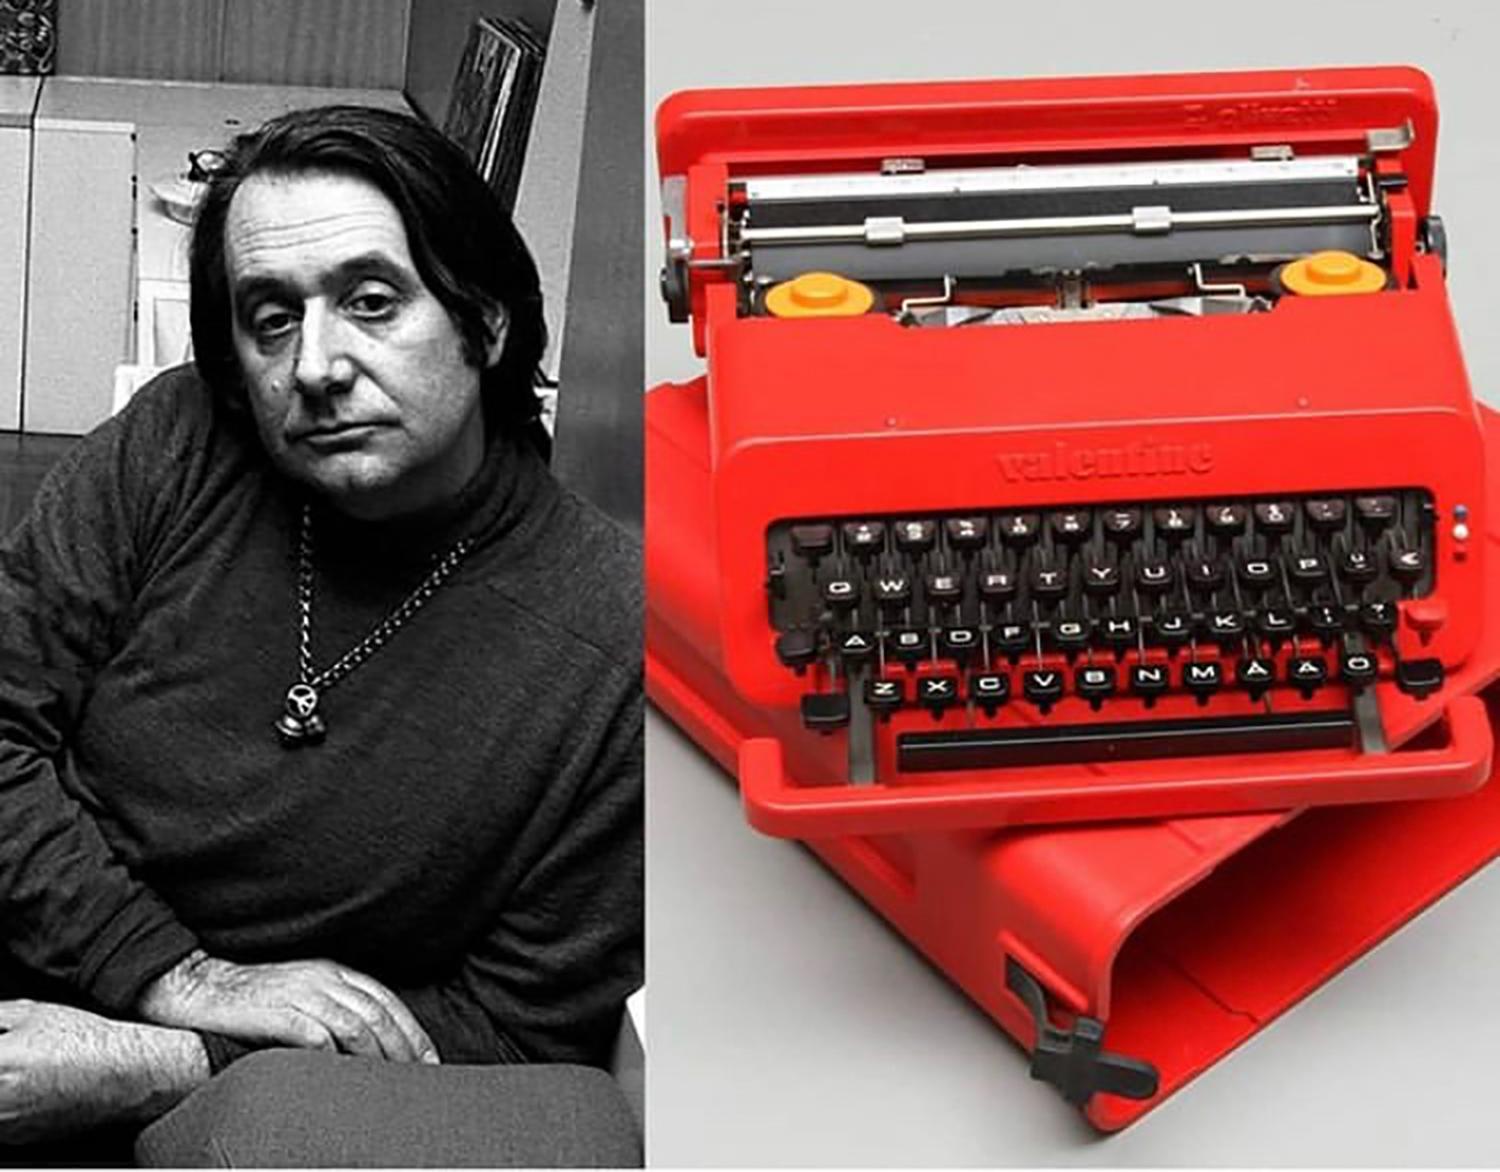 1968, Ettore Sottsas & Perry King for Olivetti, Italy, Red 